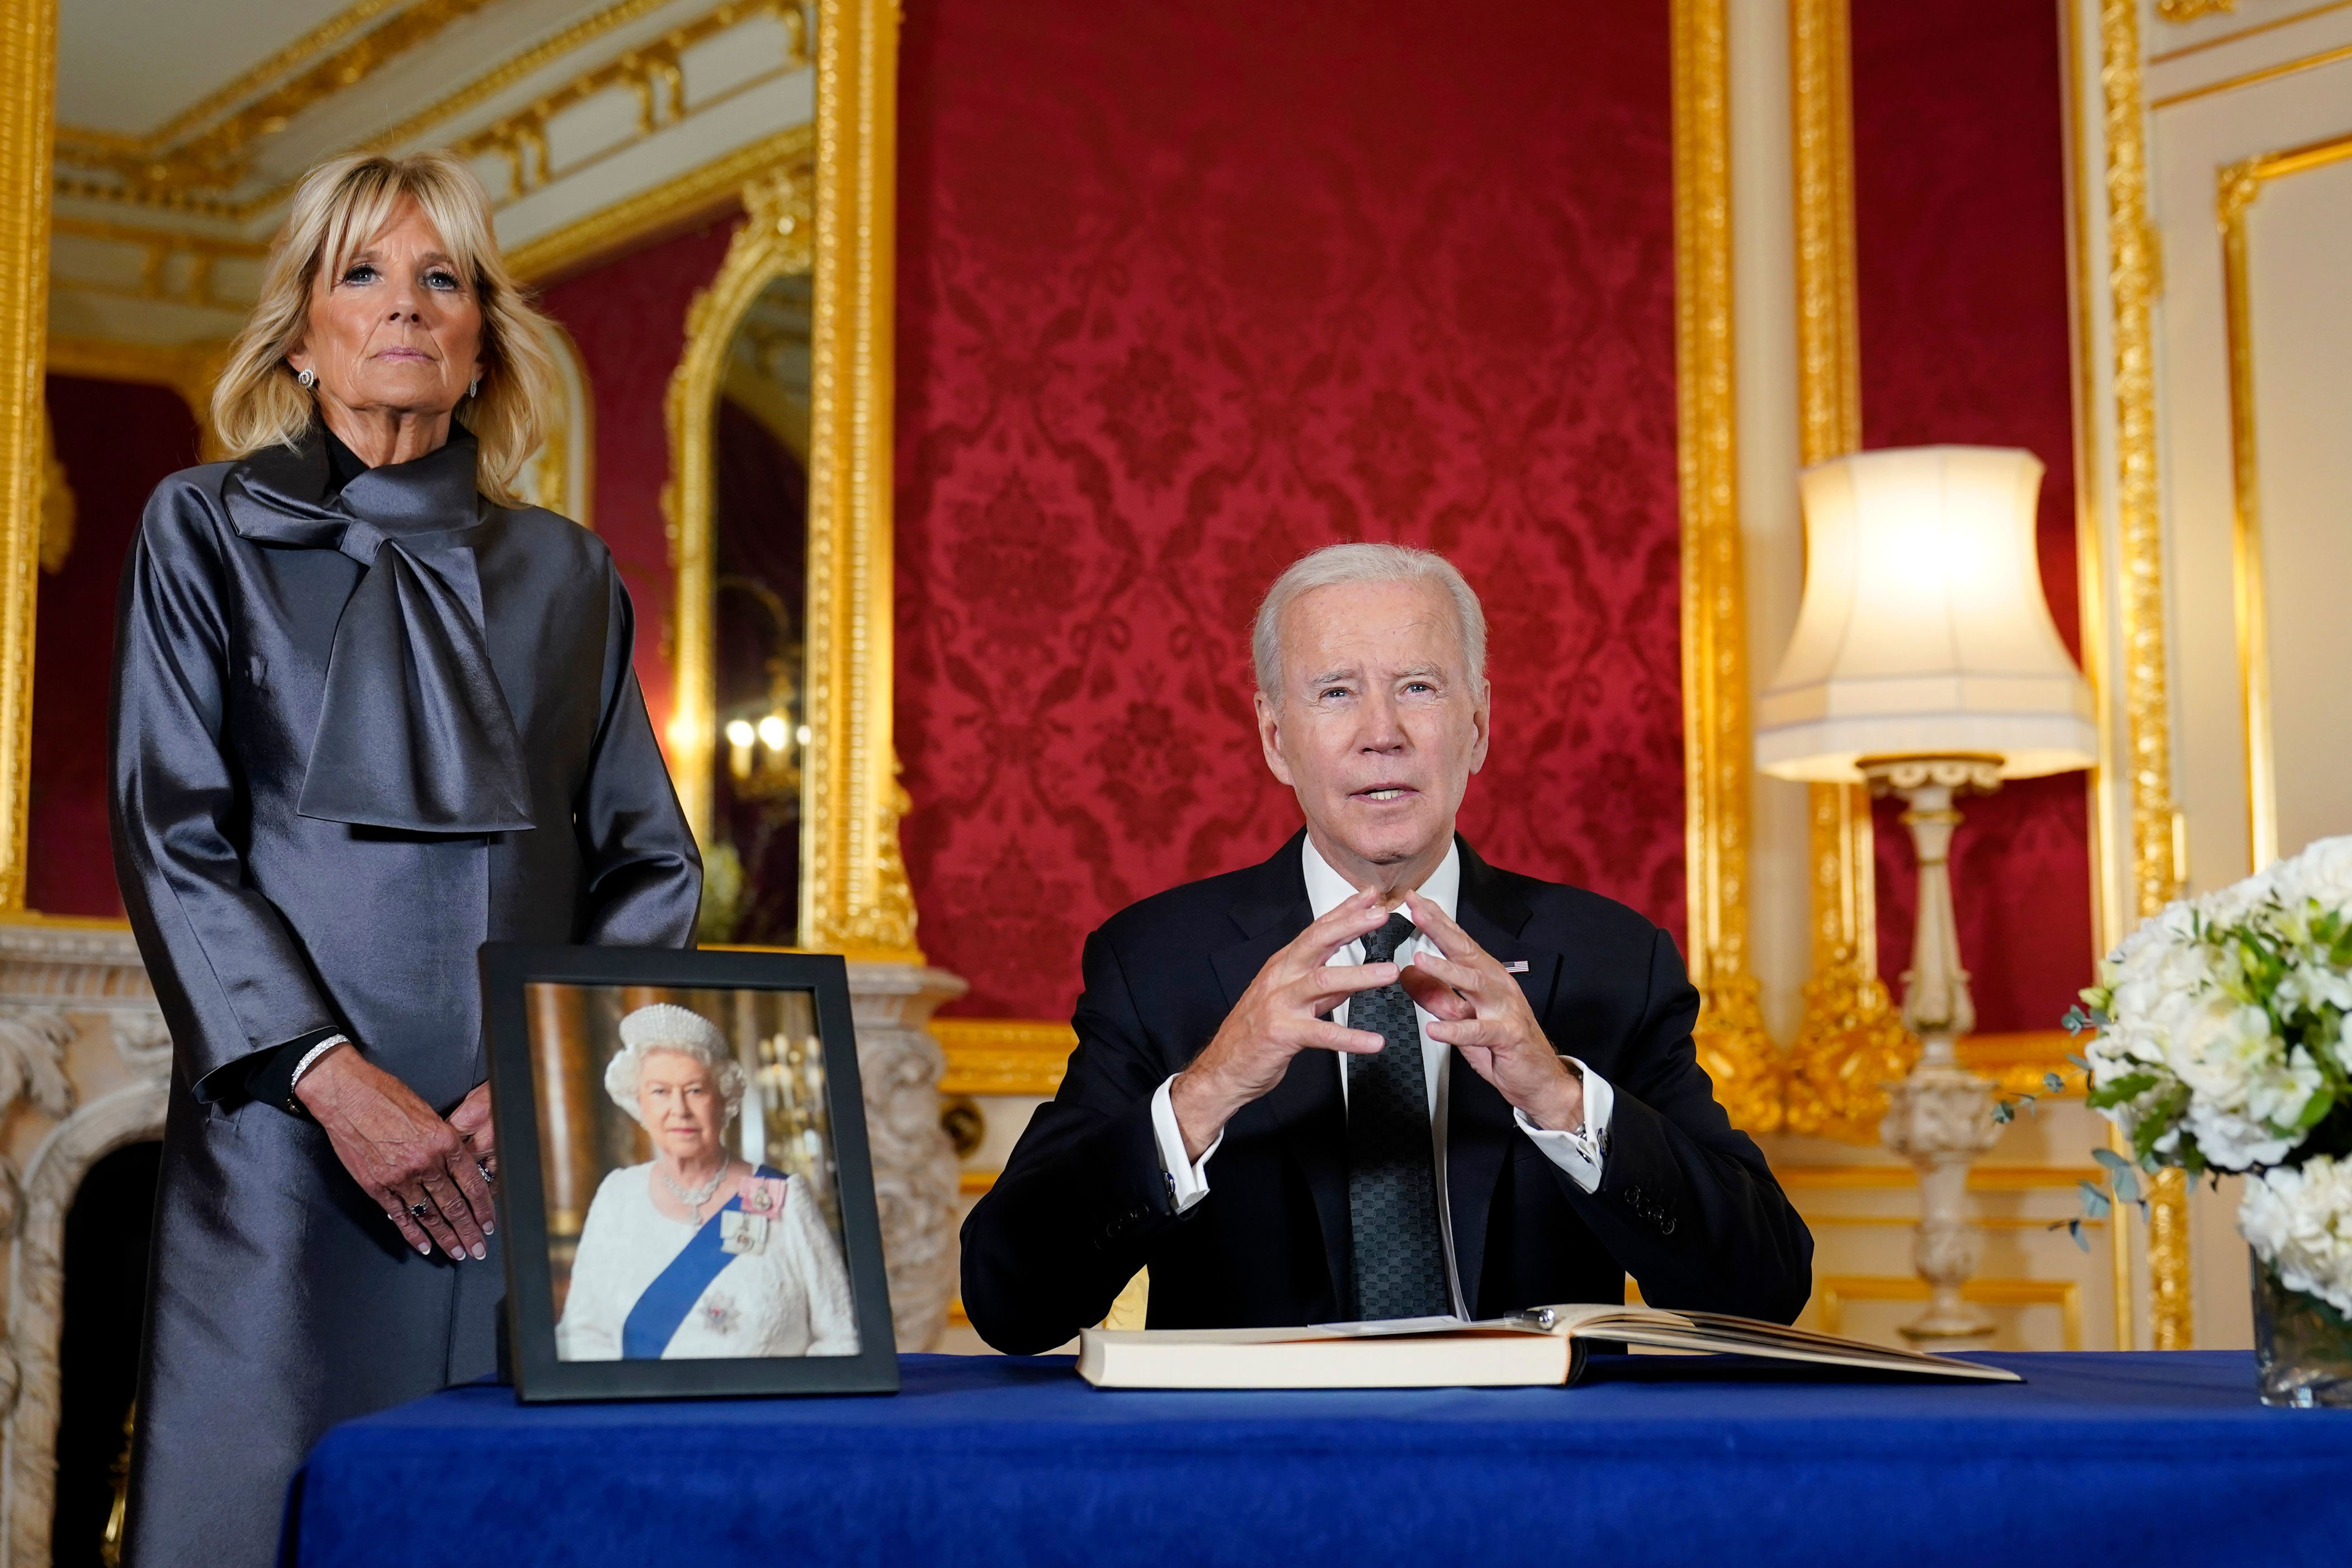 <p>As first lady Jill Biden looked on, President Joe Biden spoke after signing a book of condolence at Lancaster House in London on Sept. 18, 2022, following the death of Queen Elizabeth II.</p>